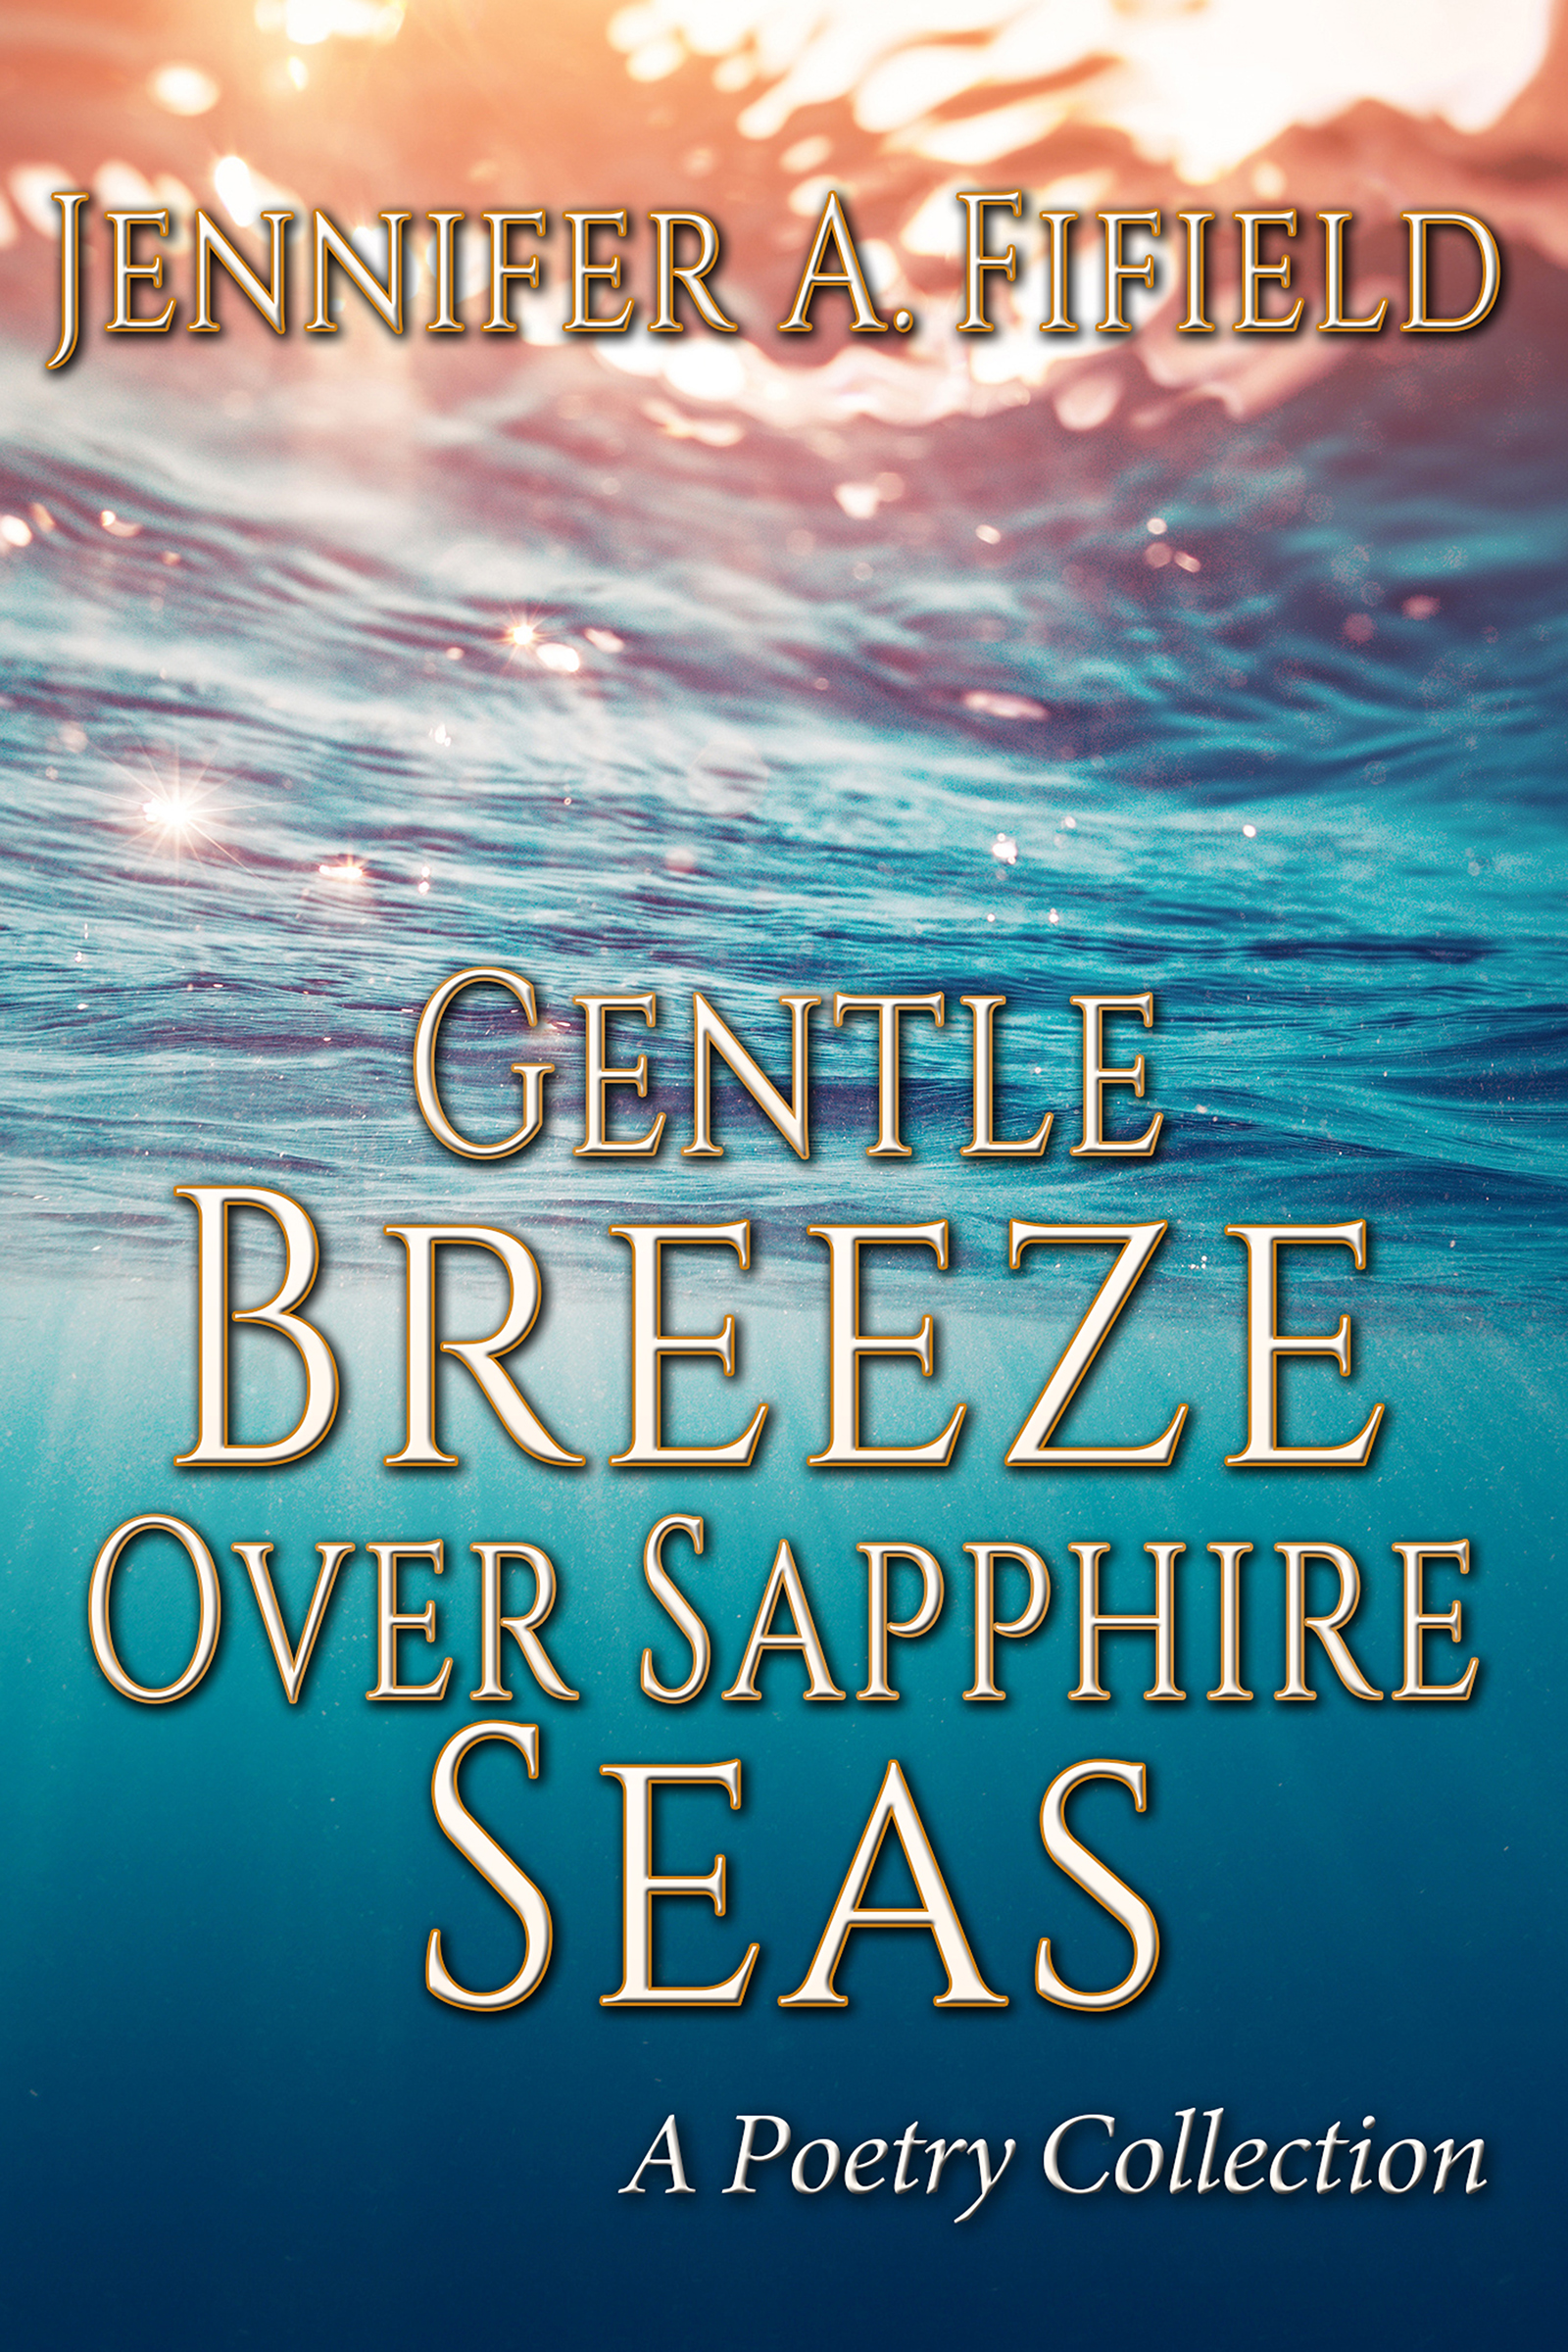 Book cover for Gentle Breeze Over Sapphire Seas by Jennifer A. Fifield